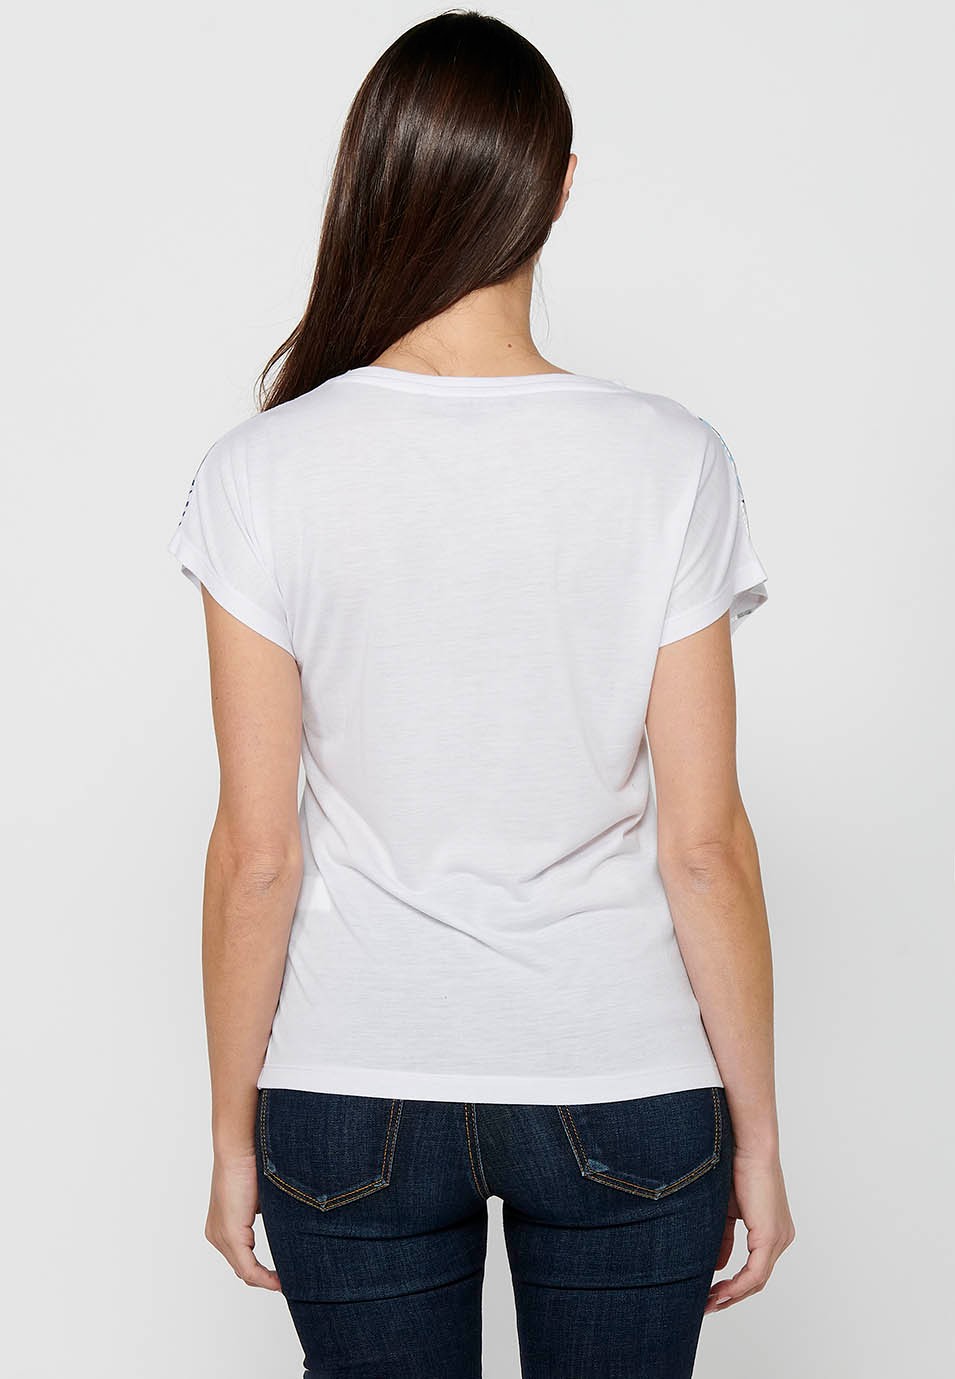 Women's White Round Neck Short Sleeve T-shirt with Front Print